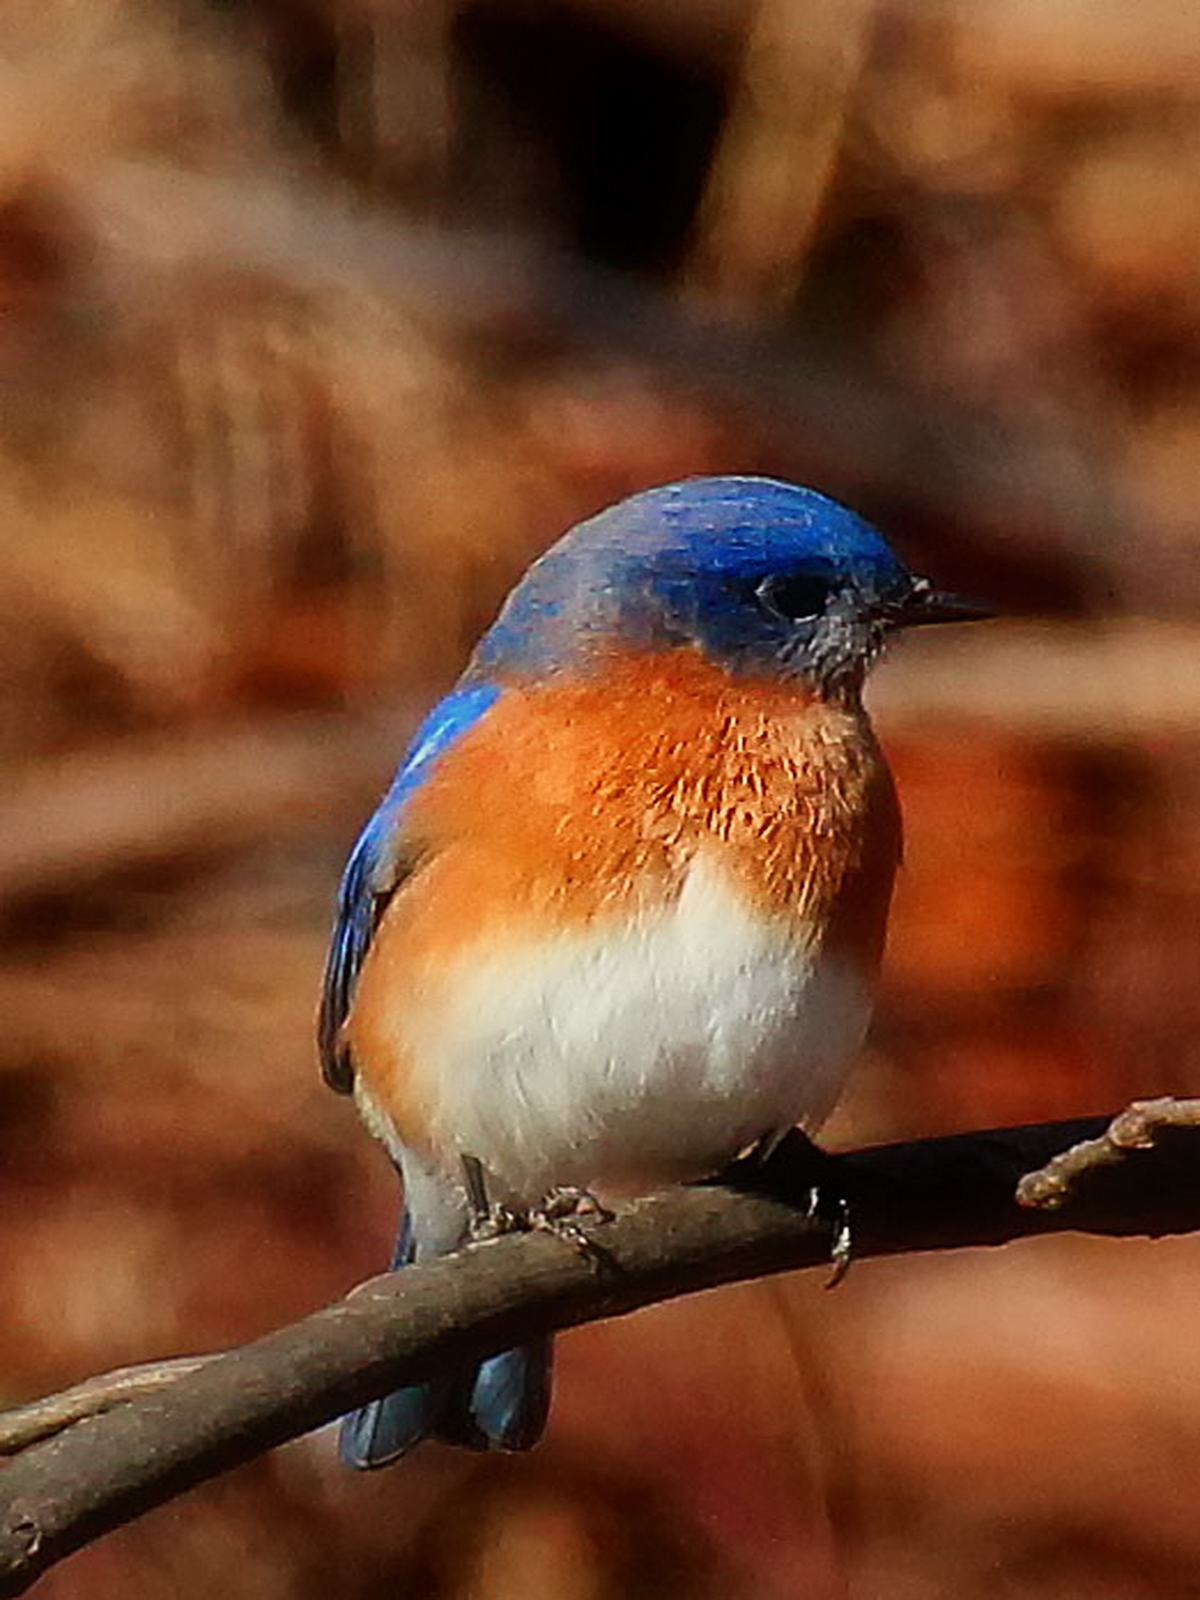 The Bluebird remains alert keeping one eye on his friends as they feed on berries.